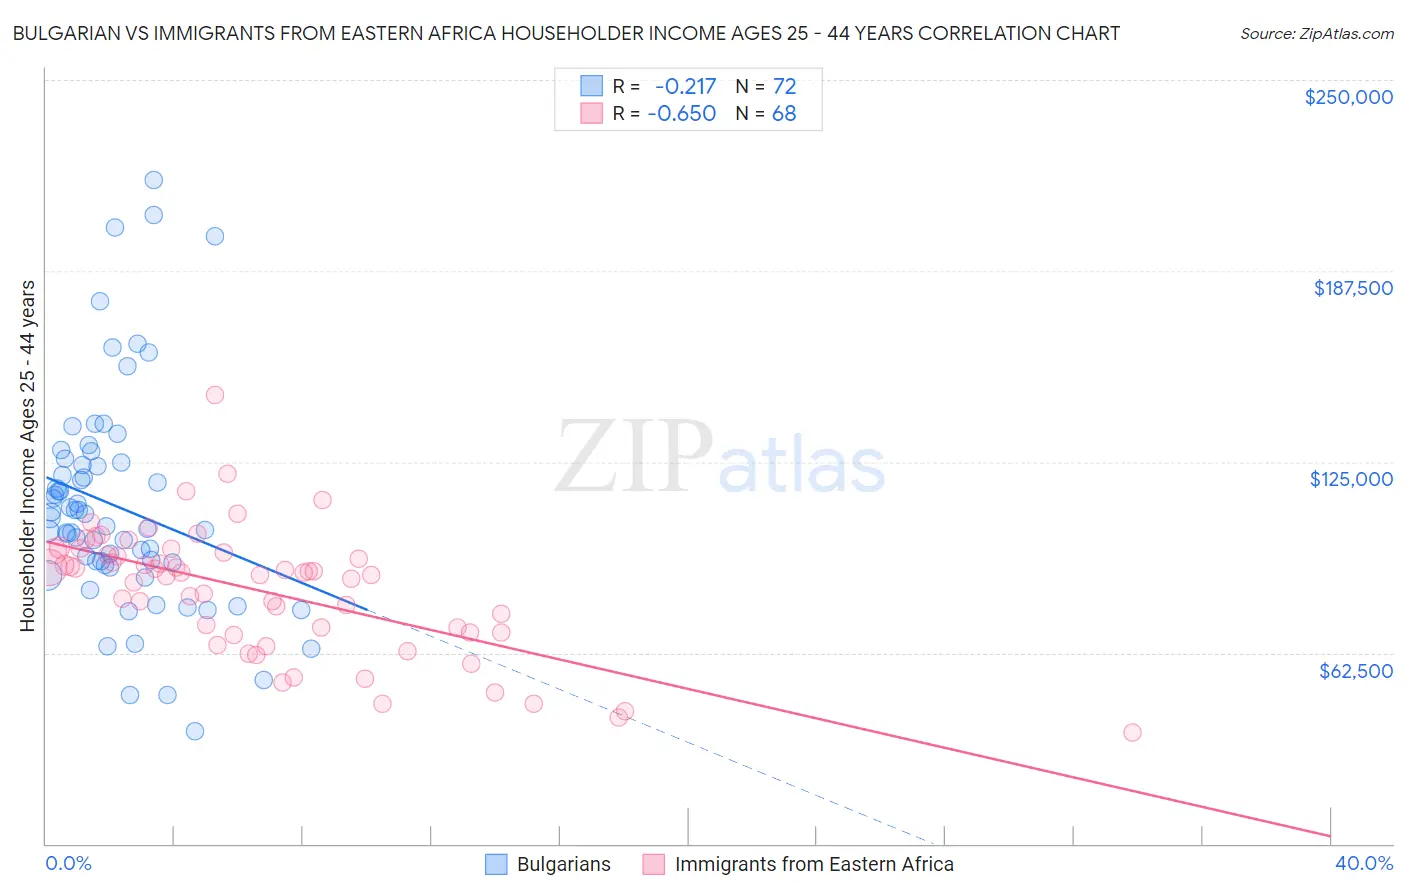 Bulgarian vs Immigrants from Eastern Africa Householder Income Ages 25 - 44 years